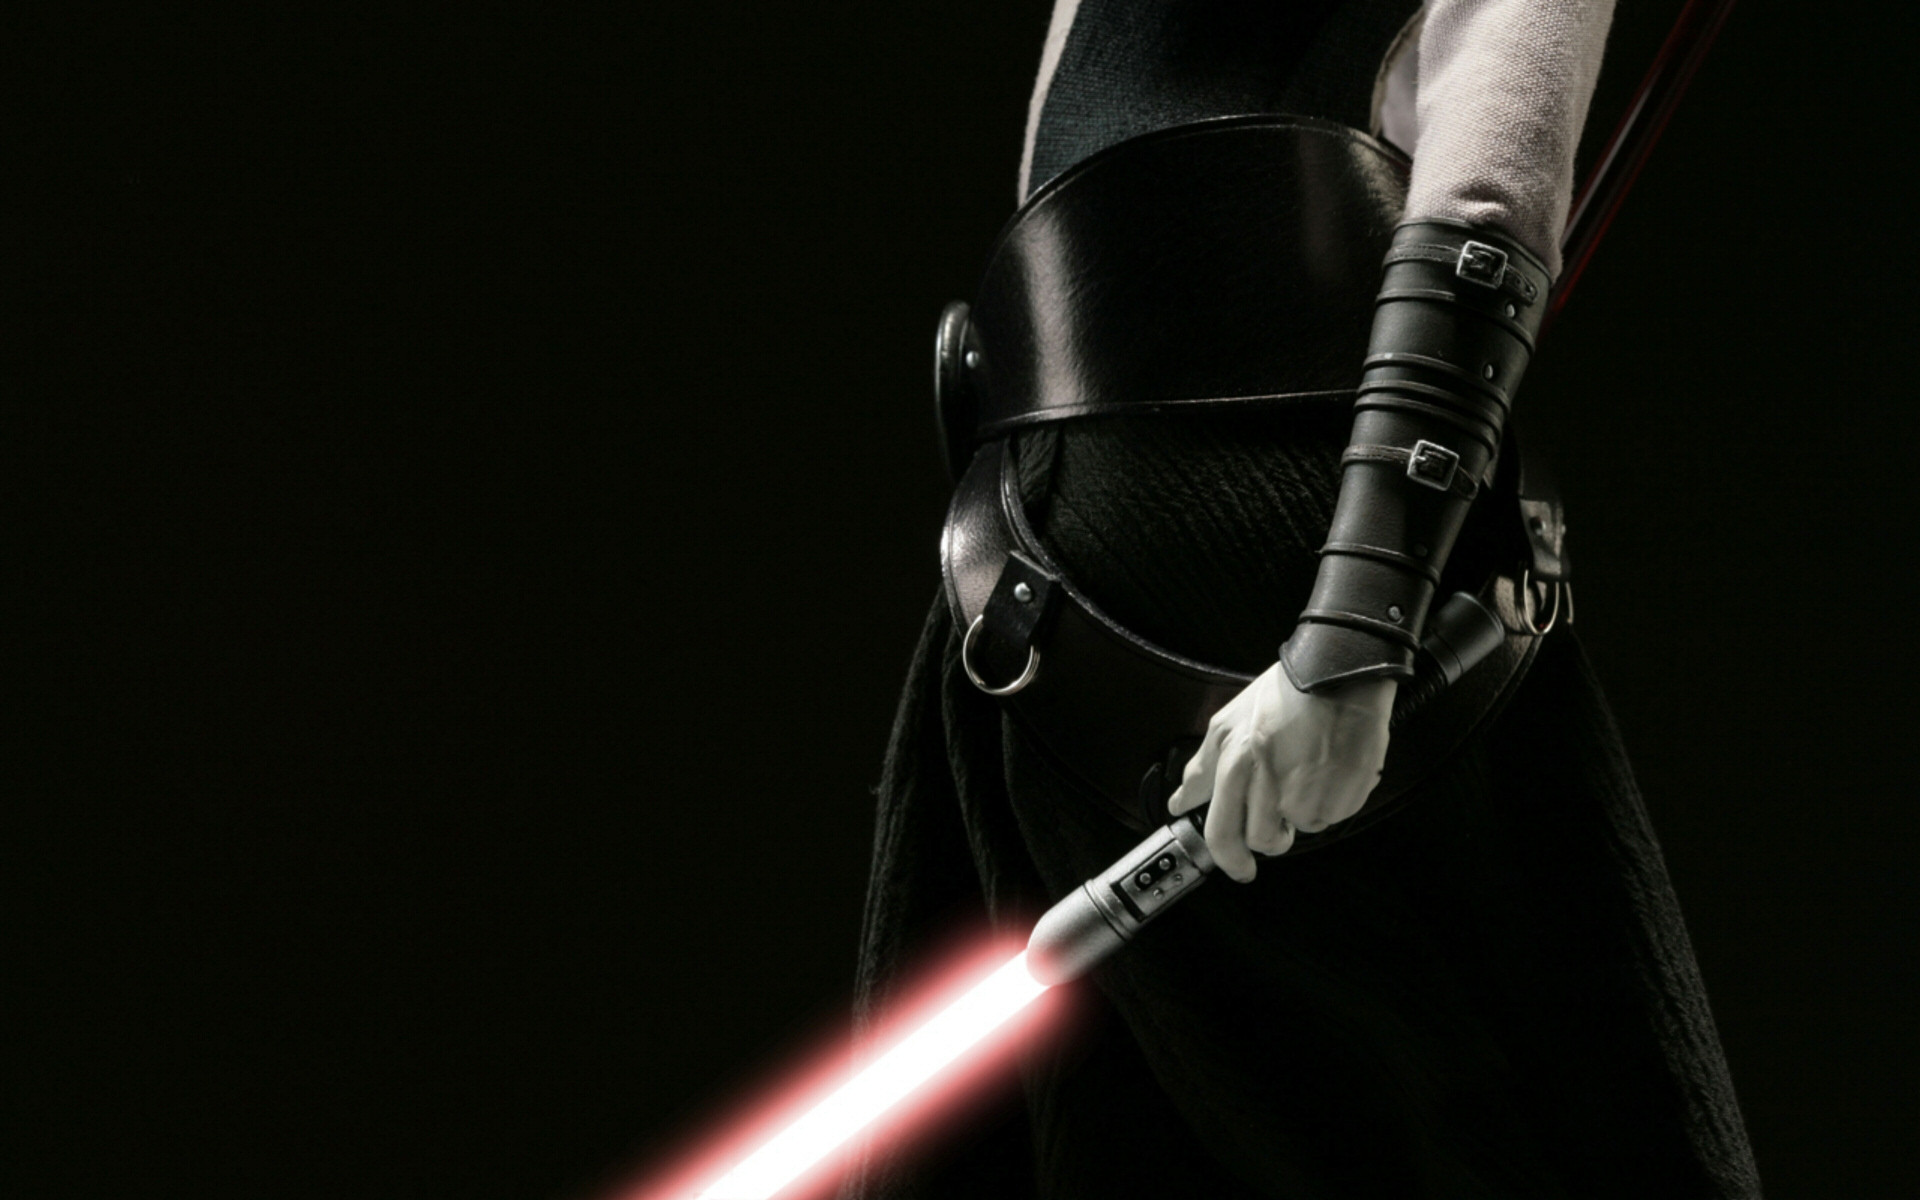 1920x1200 Sith and Saber HD Wallpapers, Sith and Saber Desktop Wallpapers, Sith .